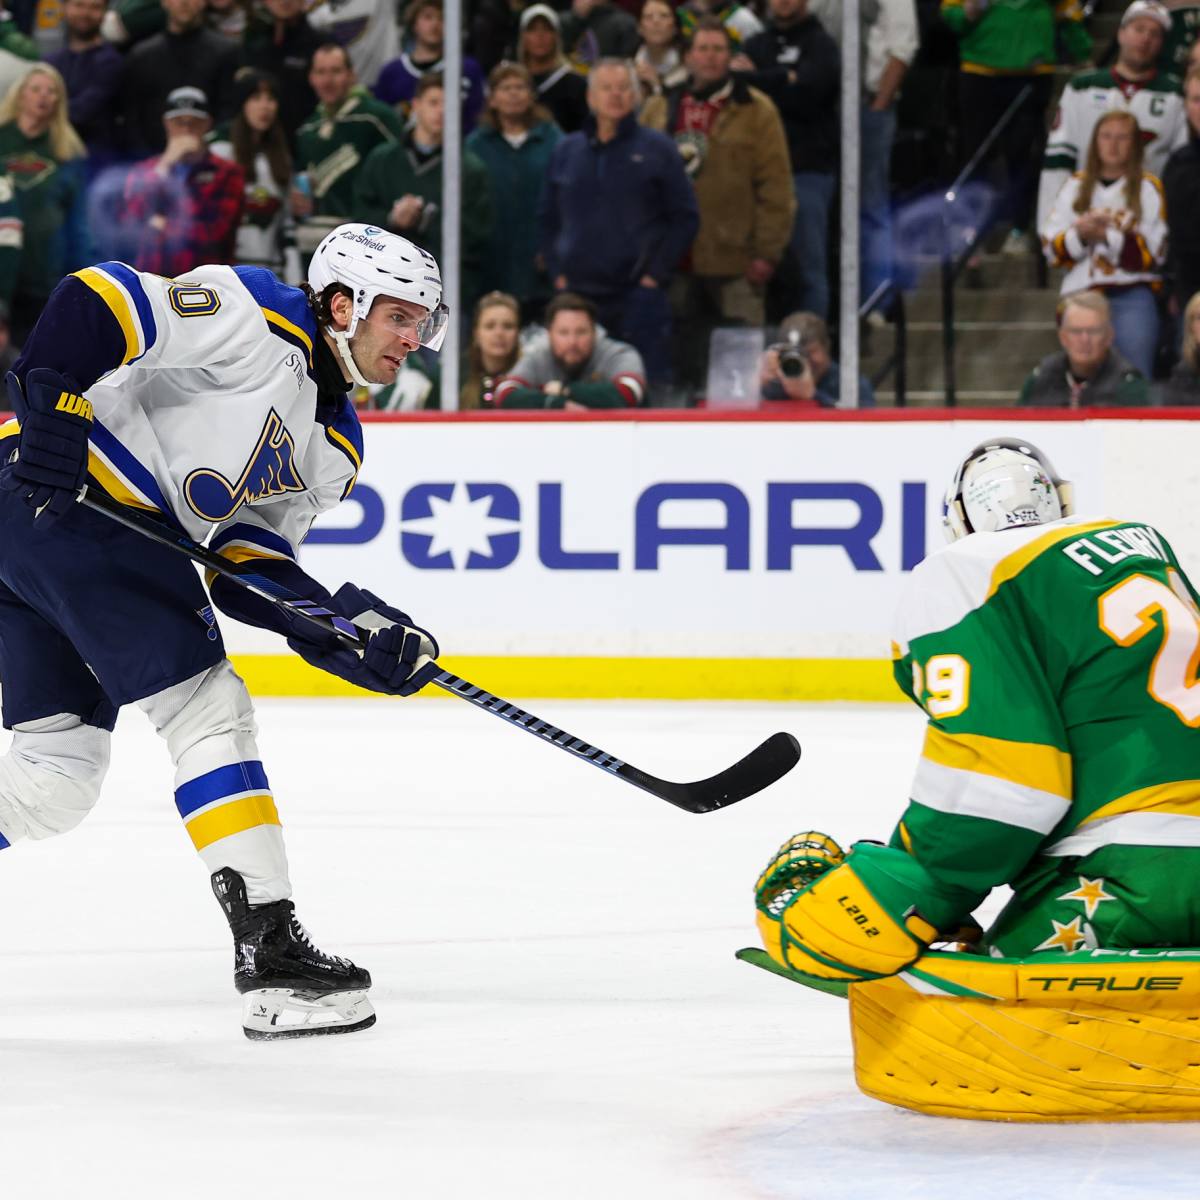 Wild fall 5-4 to Blues in overtime, miss opportunity to gain ground in  wild-card race - The Hockey News Minnesota Wild News, Analysis and More